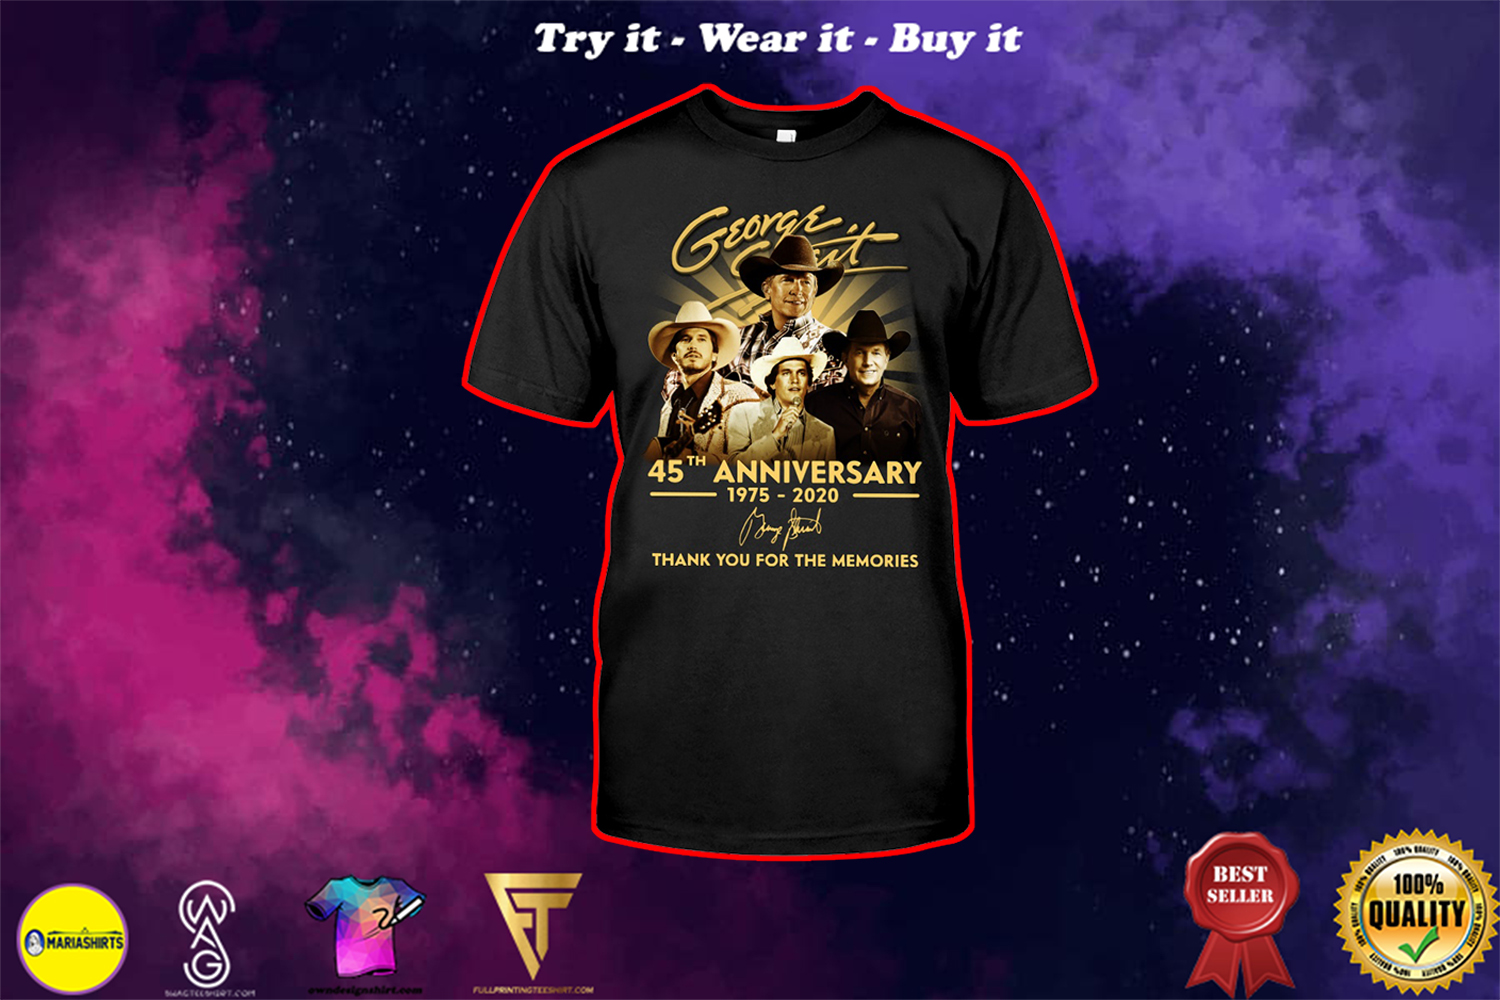 george strait 45th anniversary 1975-2020 thank you for the memories shirt